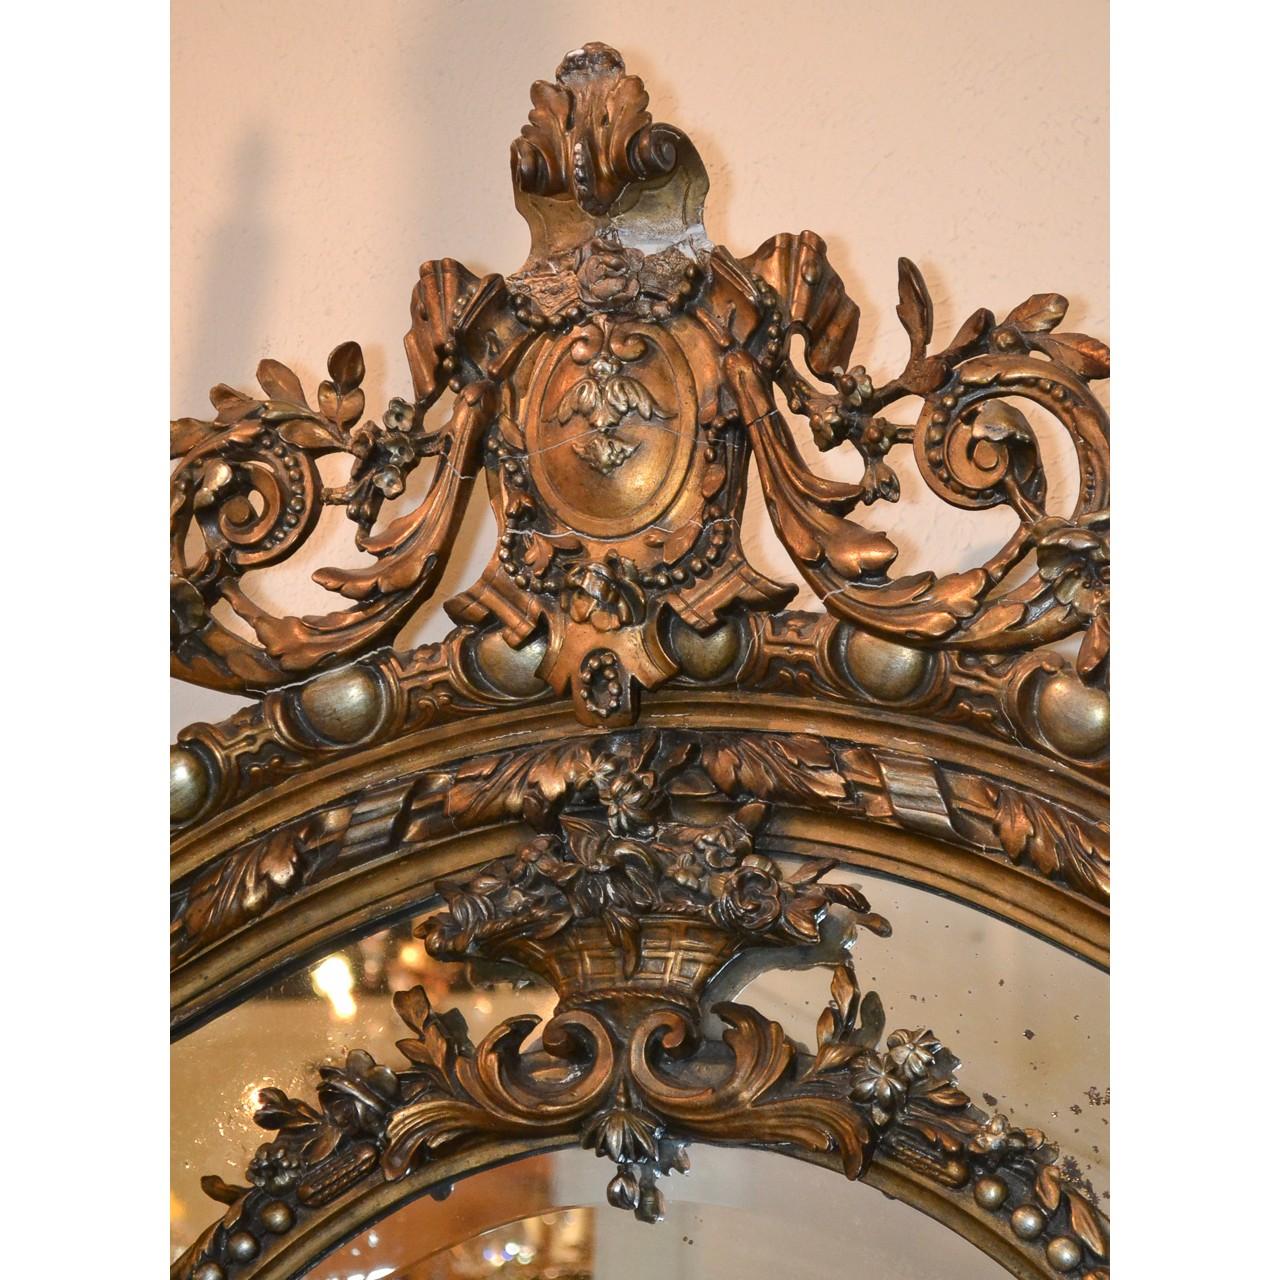 Outstanding 19th century French Louis XVI style giltwood and beveled edged wall or console mirror. The crest with a boldly carved leaf spray atop scrolling acanthus, laurel leaves, and songbirds. The oval inner frame decorated with a basket of